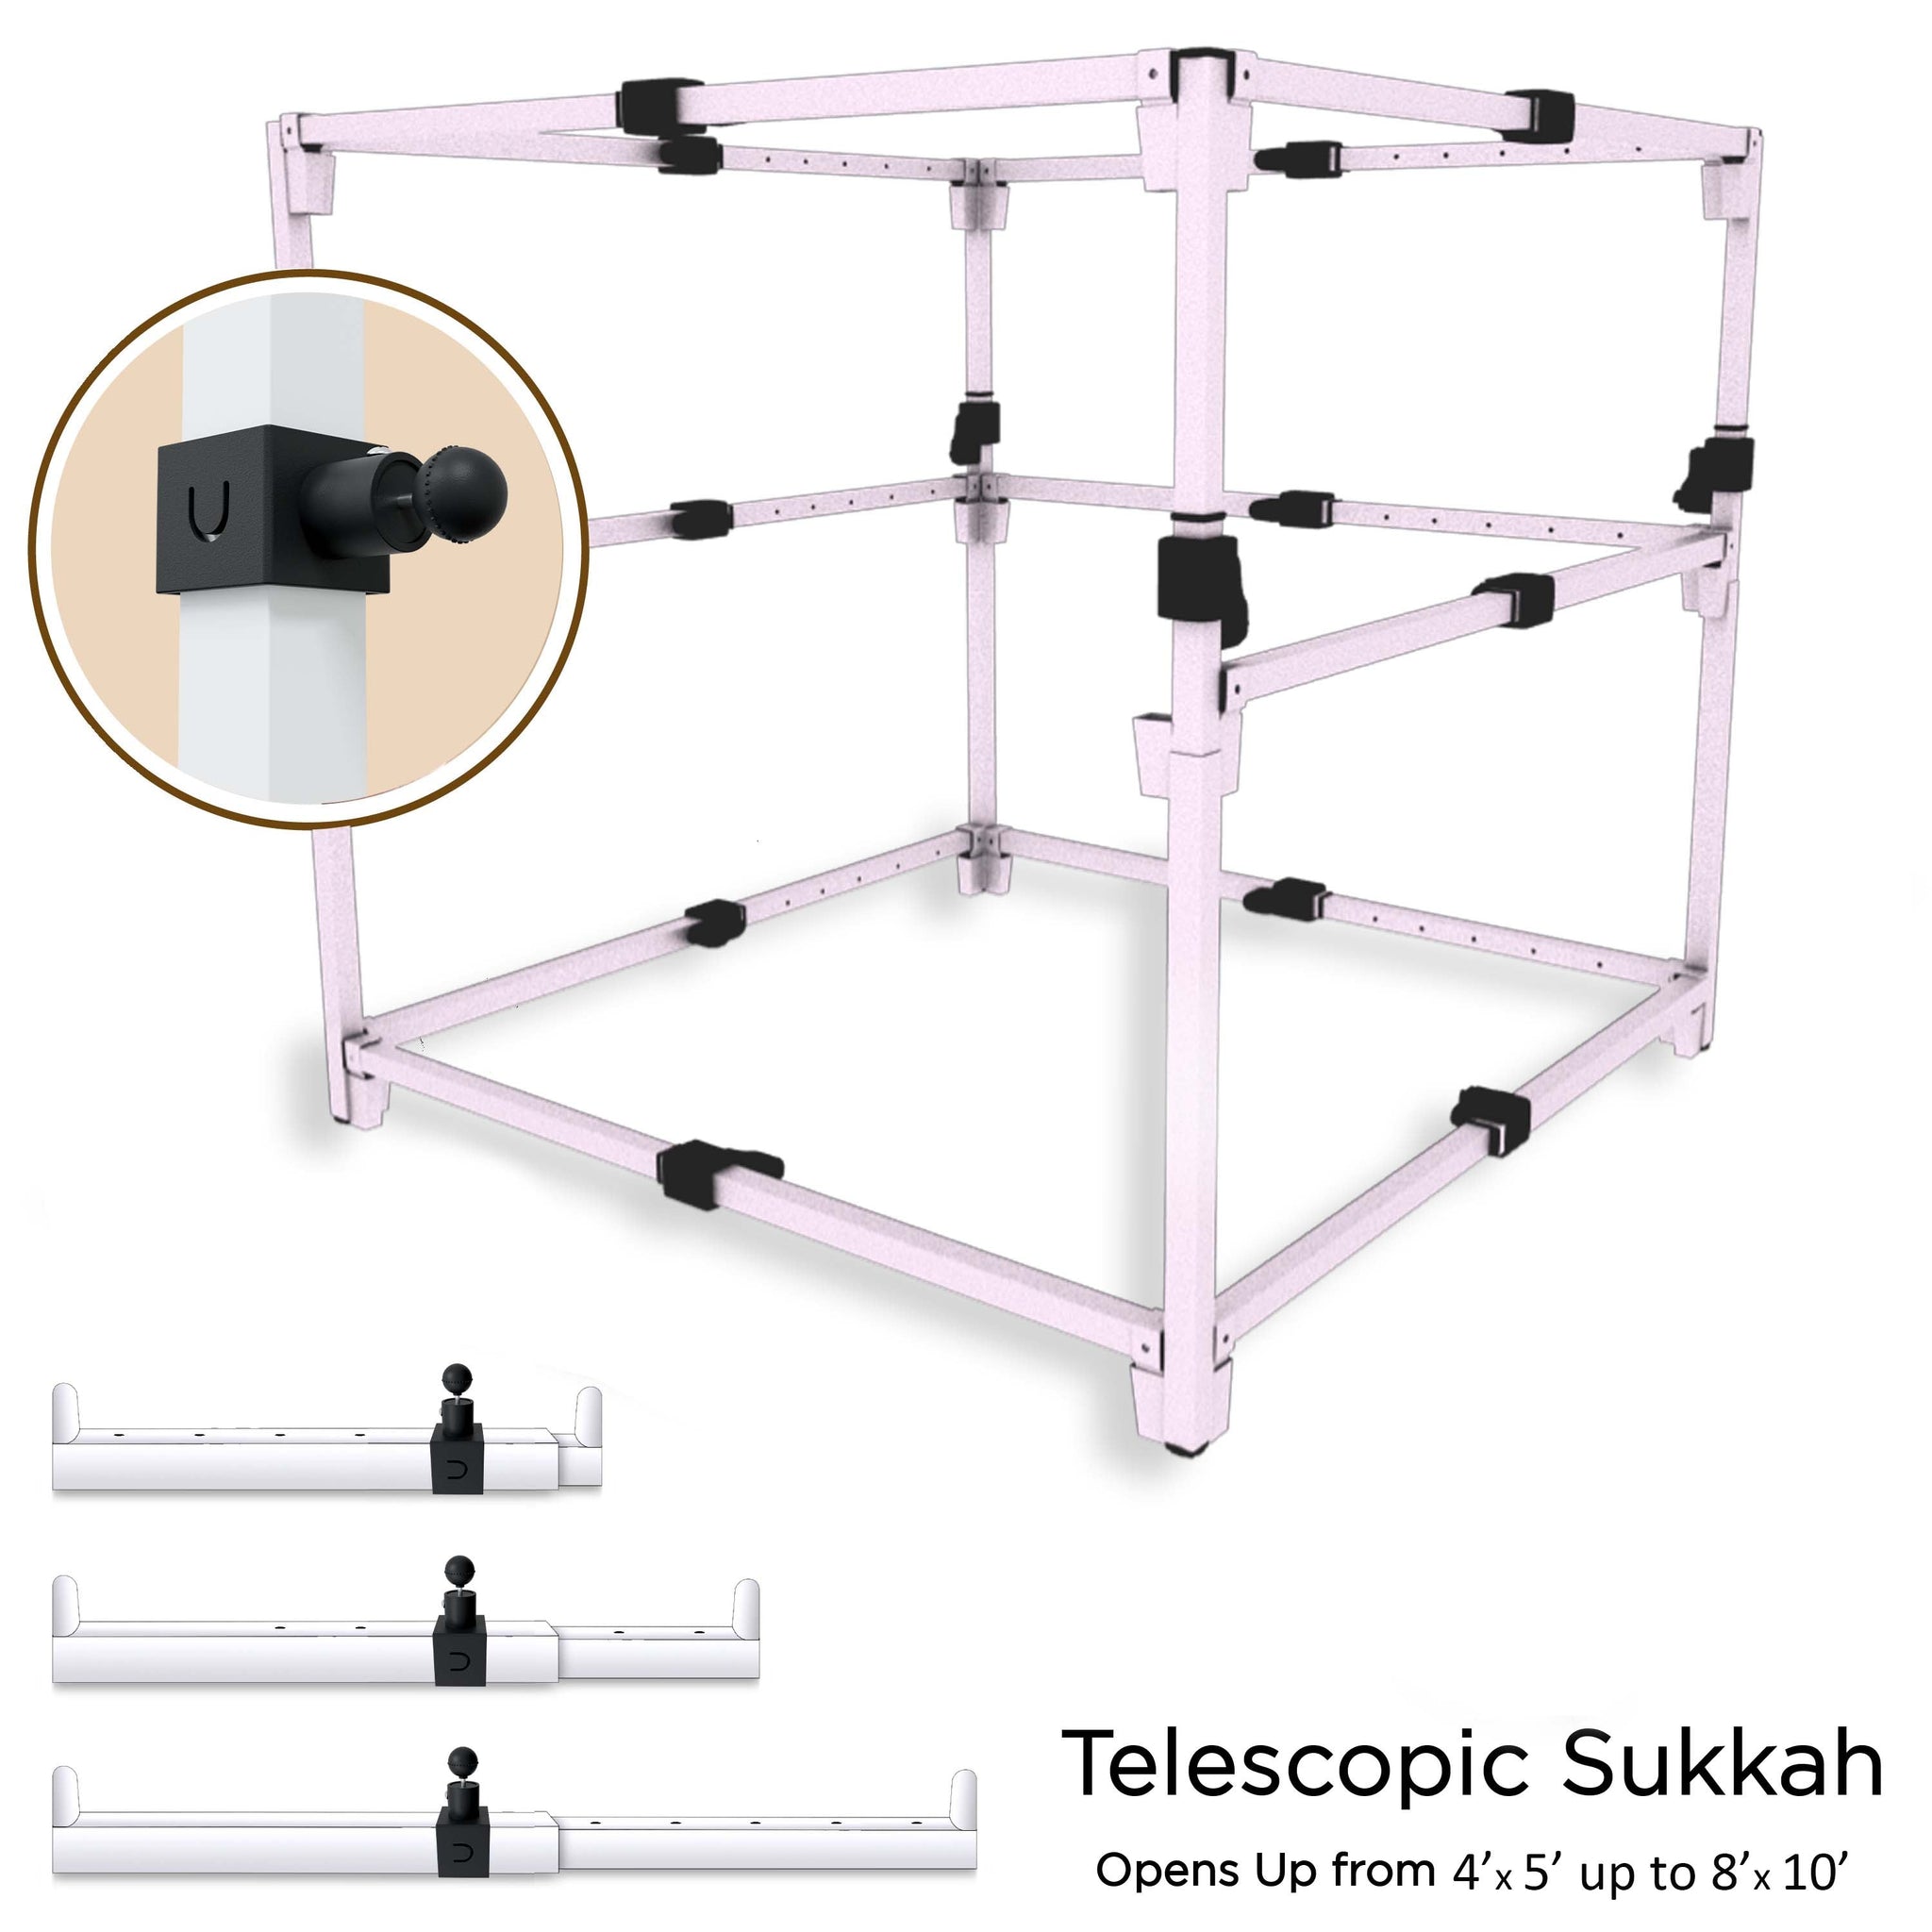 2022 Model - Sukkot Hadar Telescopic Sukkah Set: Portable, Adjustable, Kosher Certified - Expands from 4x5 to 8x10 Feet, Complete with Carry Bag